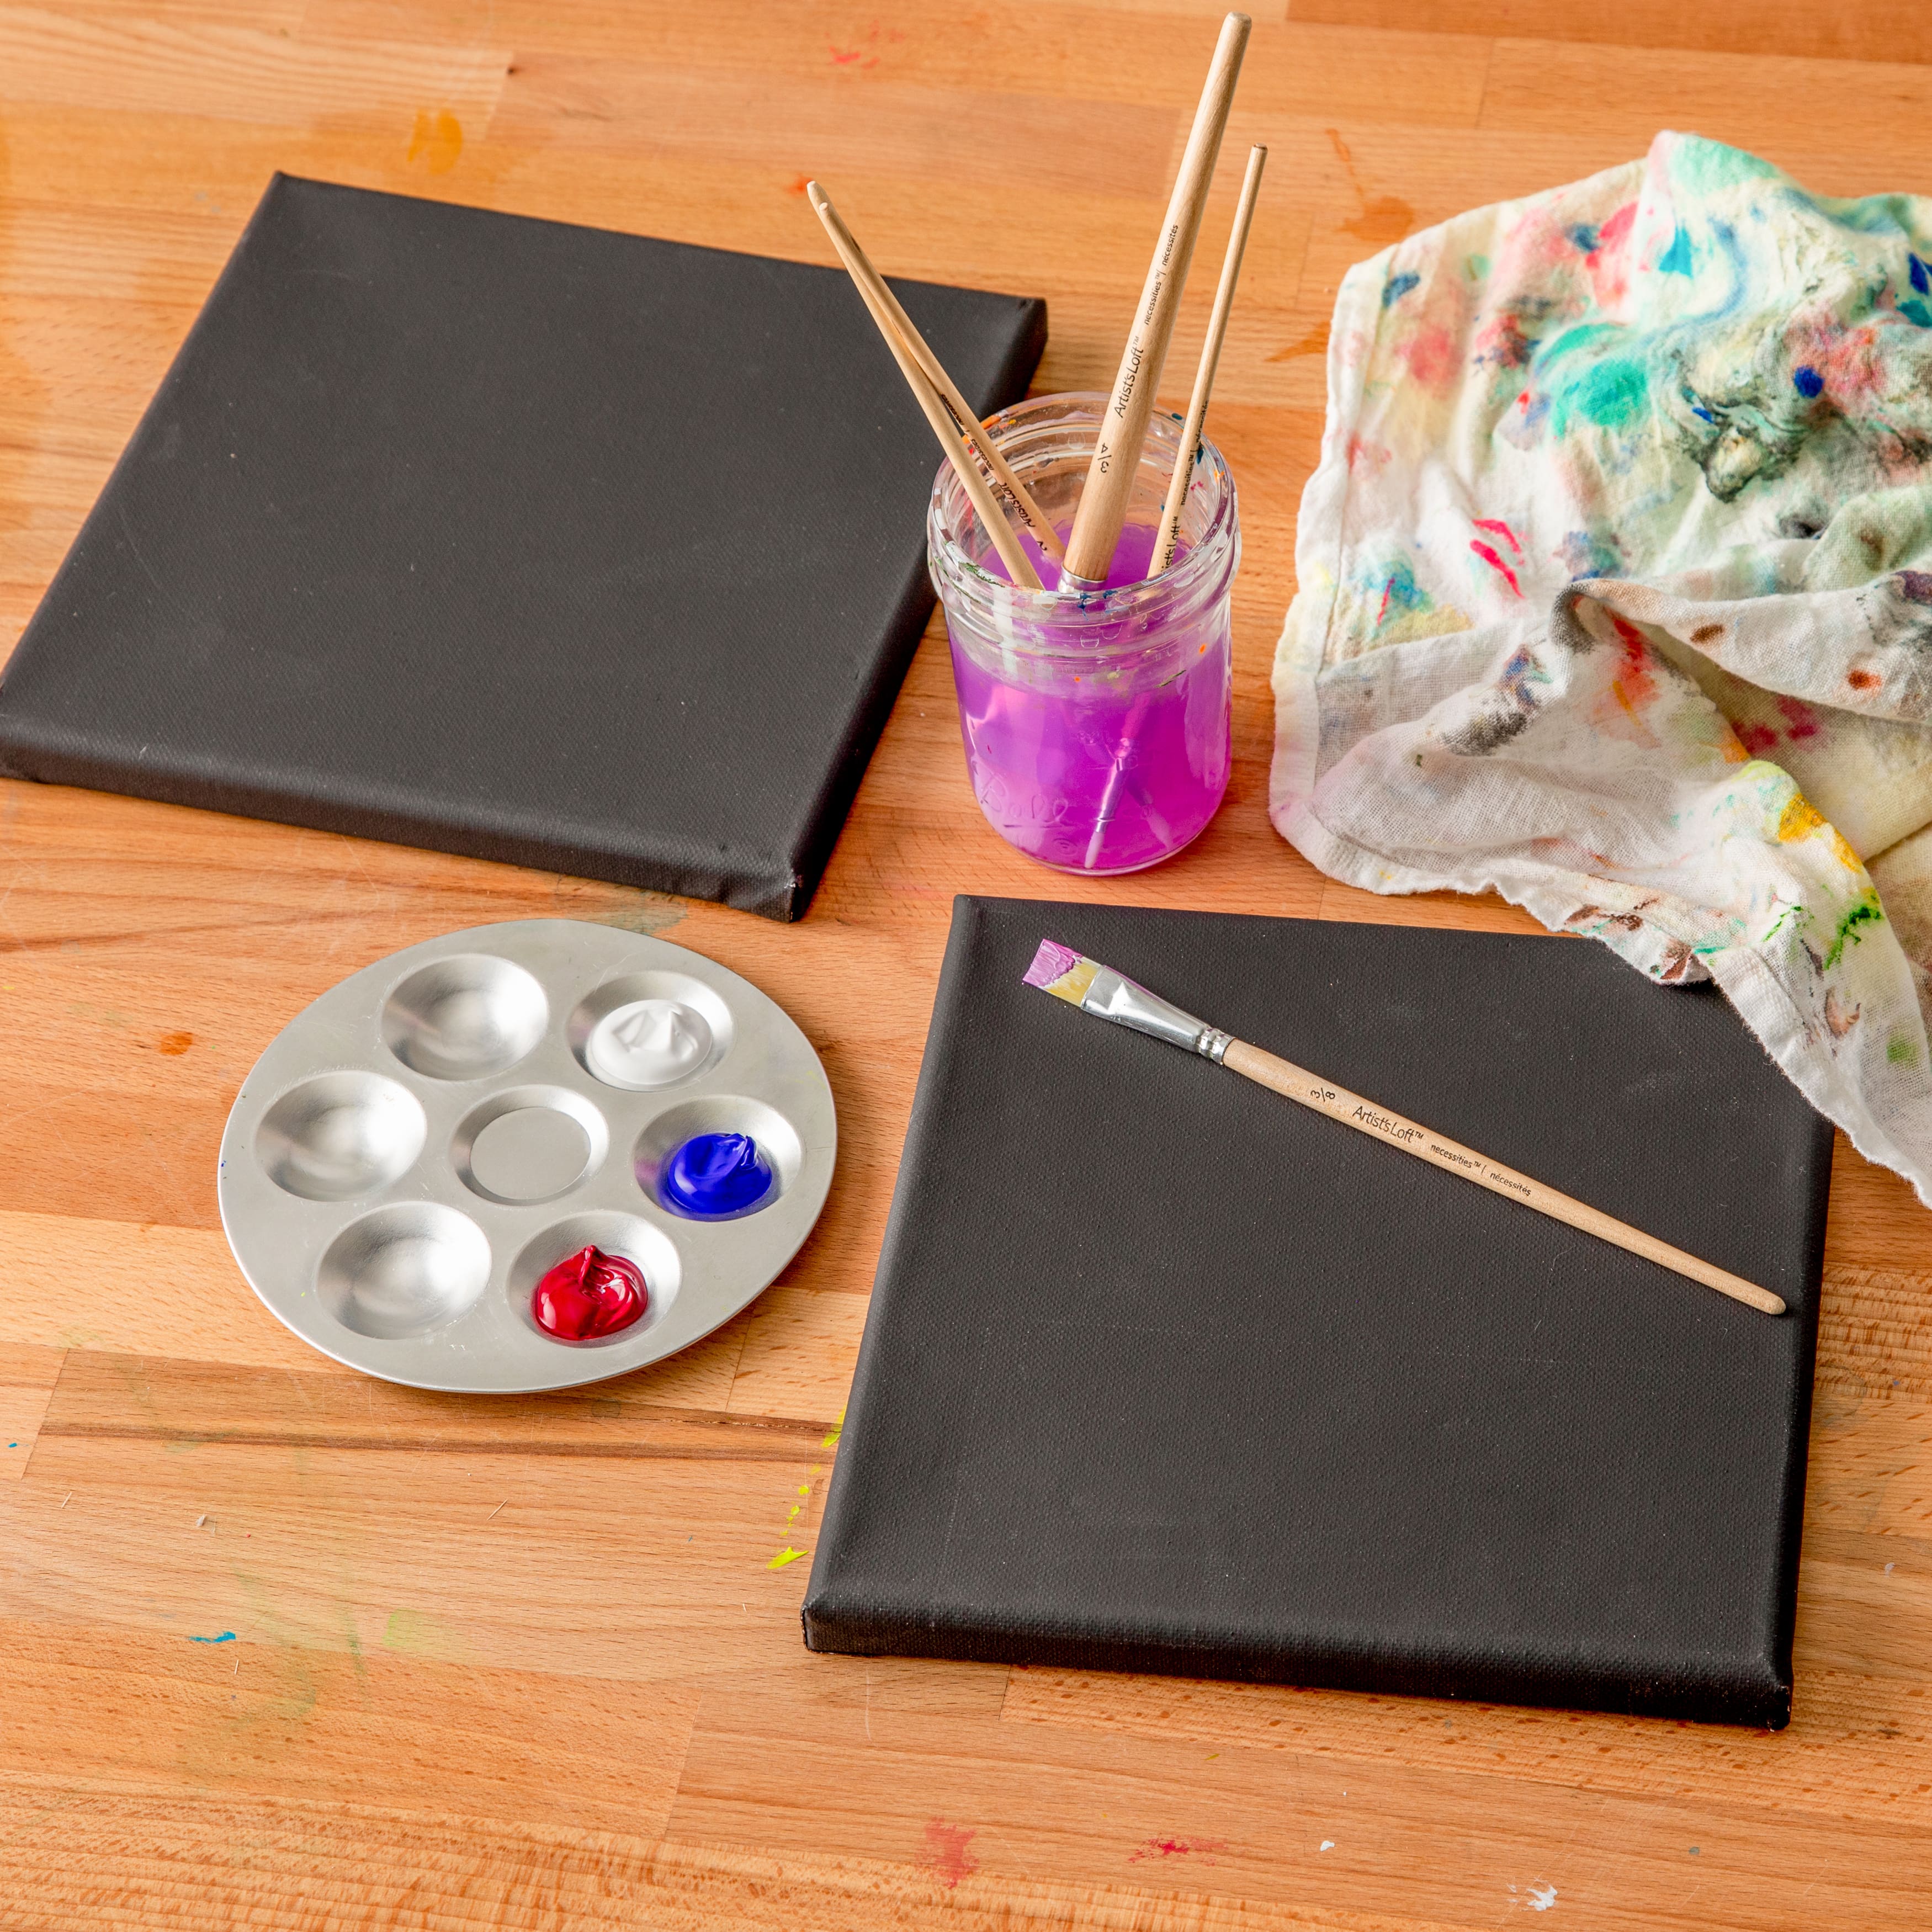 Canvas Panel Value Pack by Artist's Loft® Necessities™